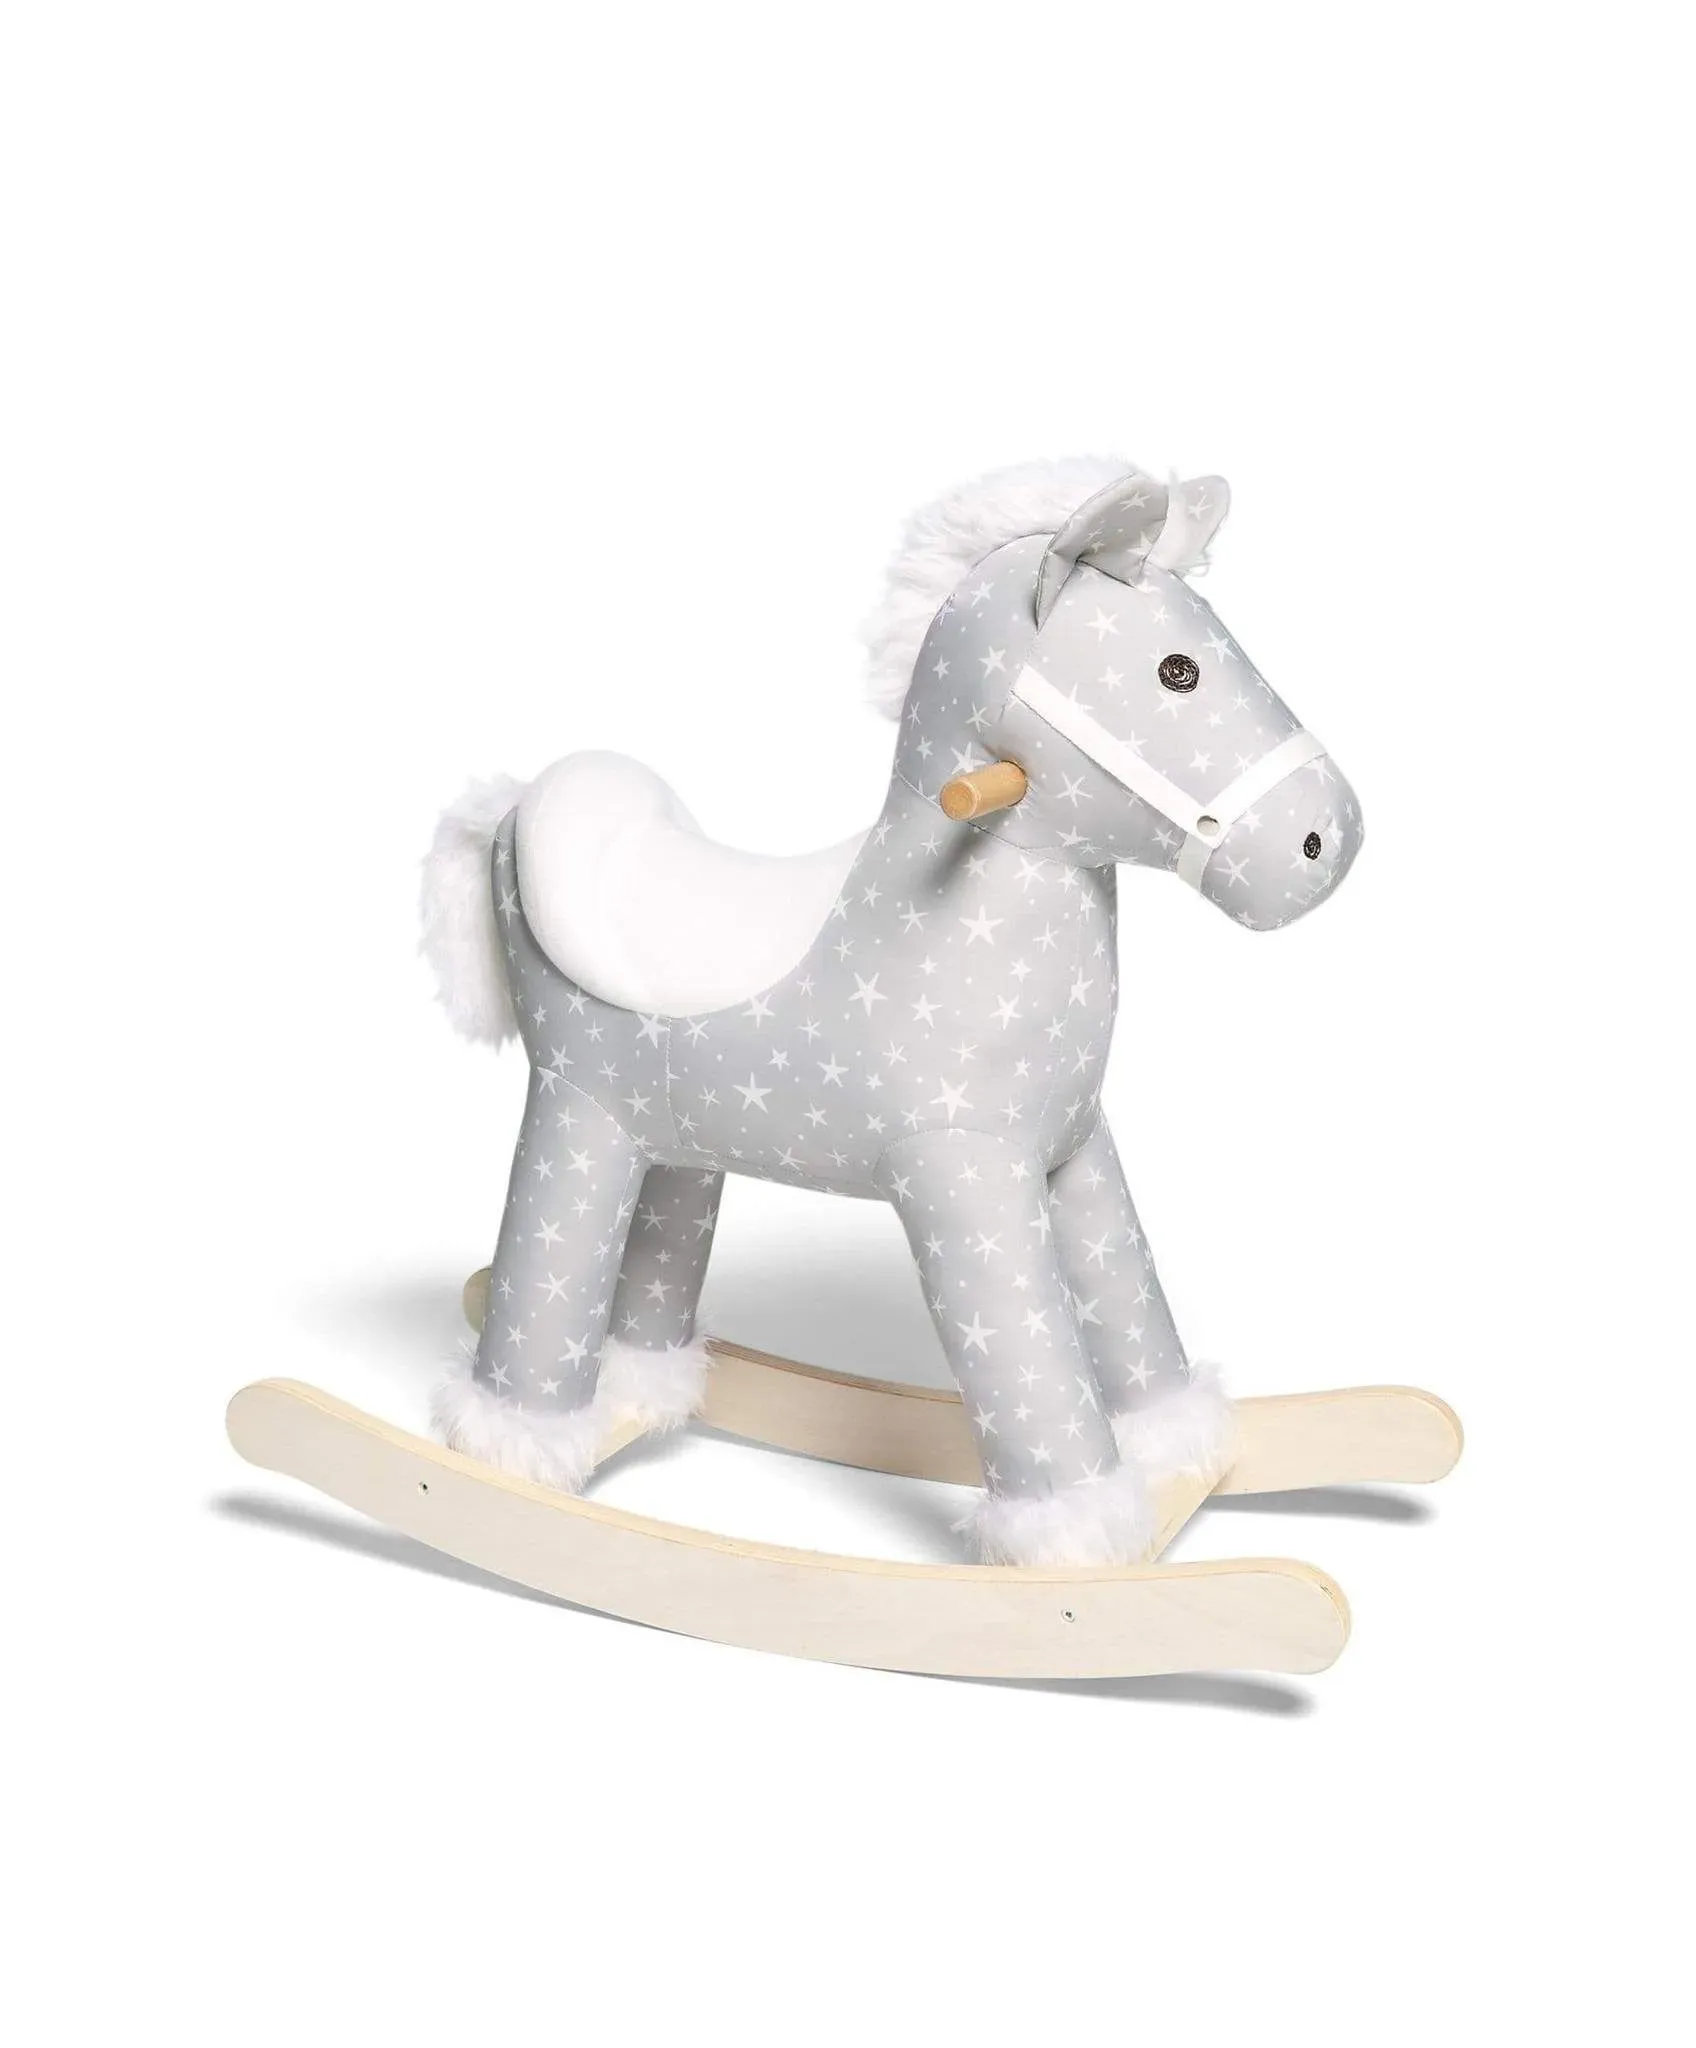 Rocking Horse, grey and white with star pattern